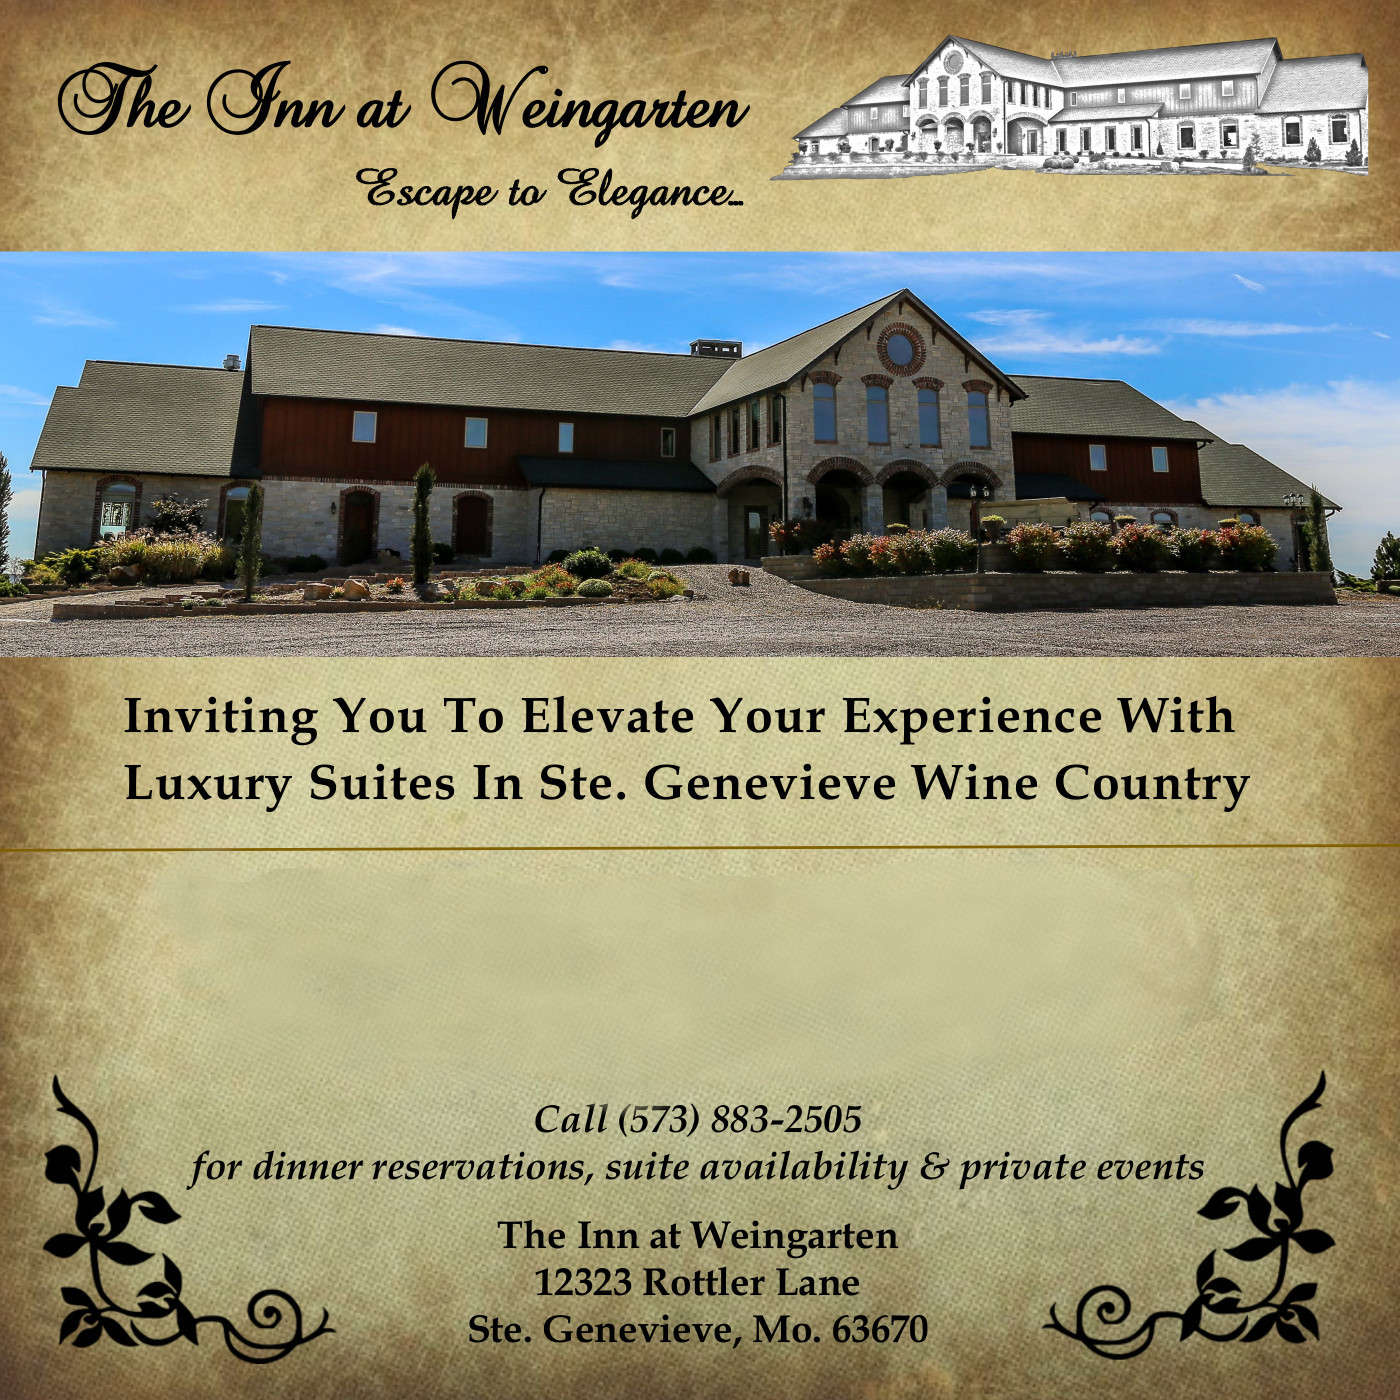 Coming soon, The Inn at Weingarten.  Call for details 573-883-2505. 12323 Rottler Lane, Ste. Genevieve, MO 63670